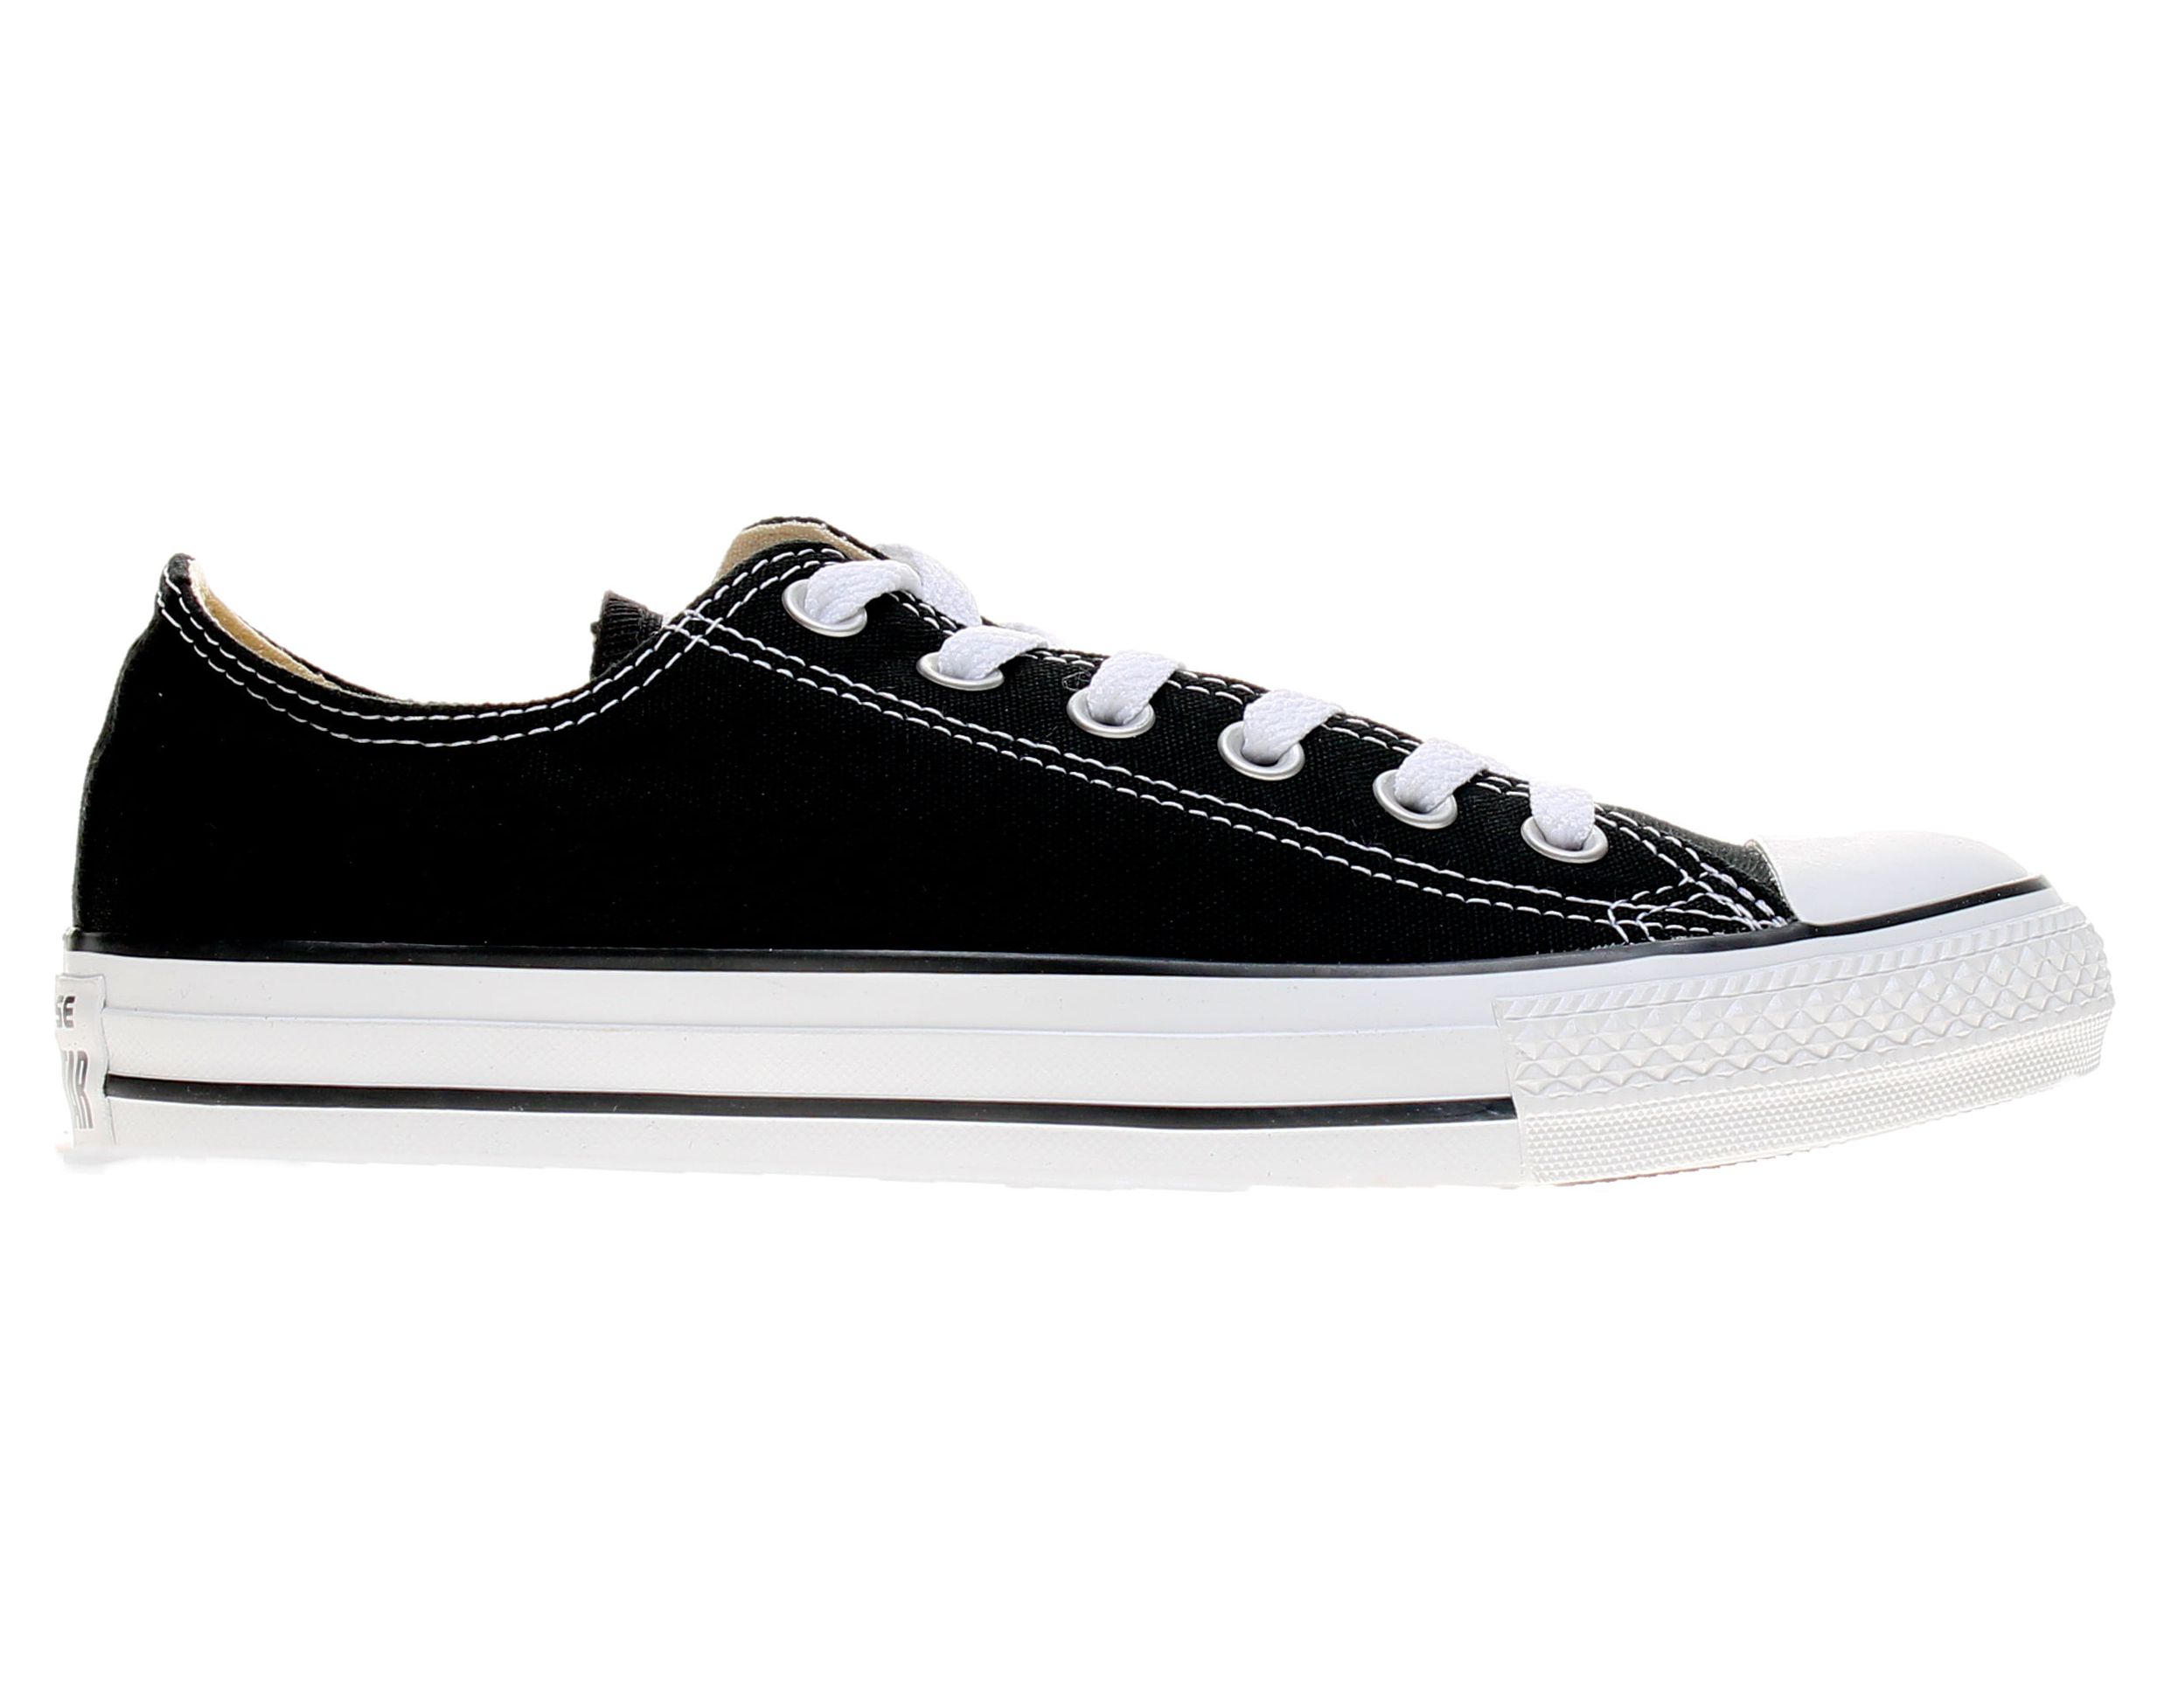 Unisex Chuck Taylor All Star Lo - image 2 of 6